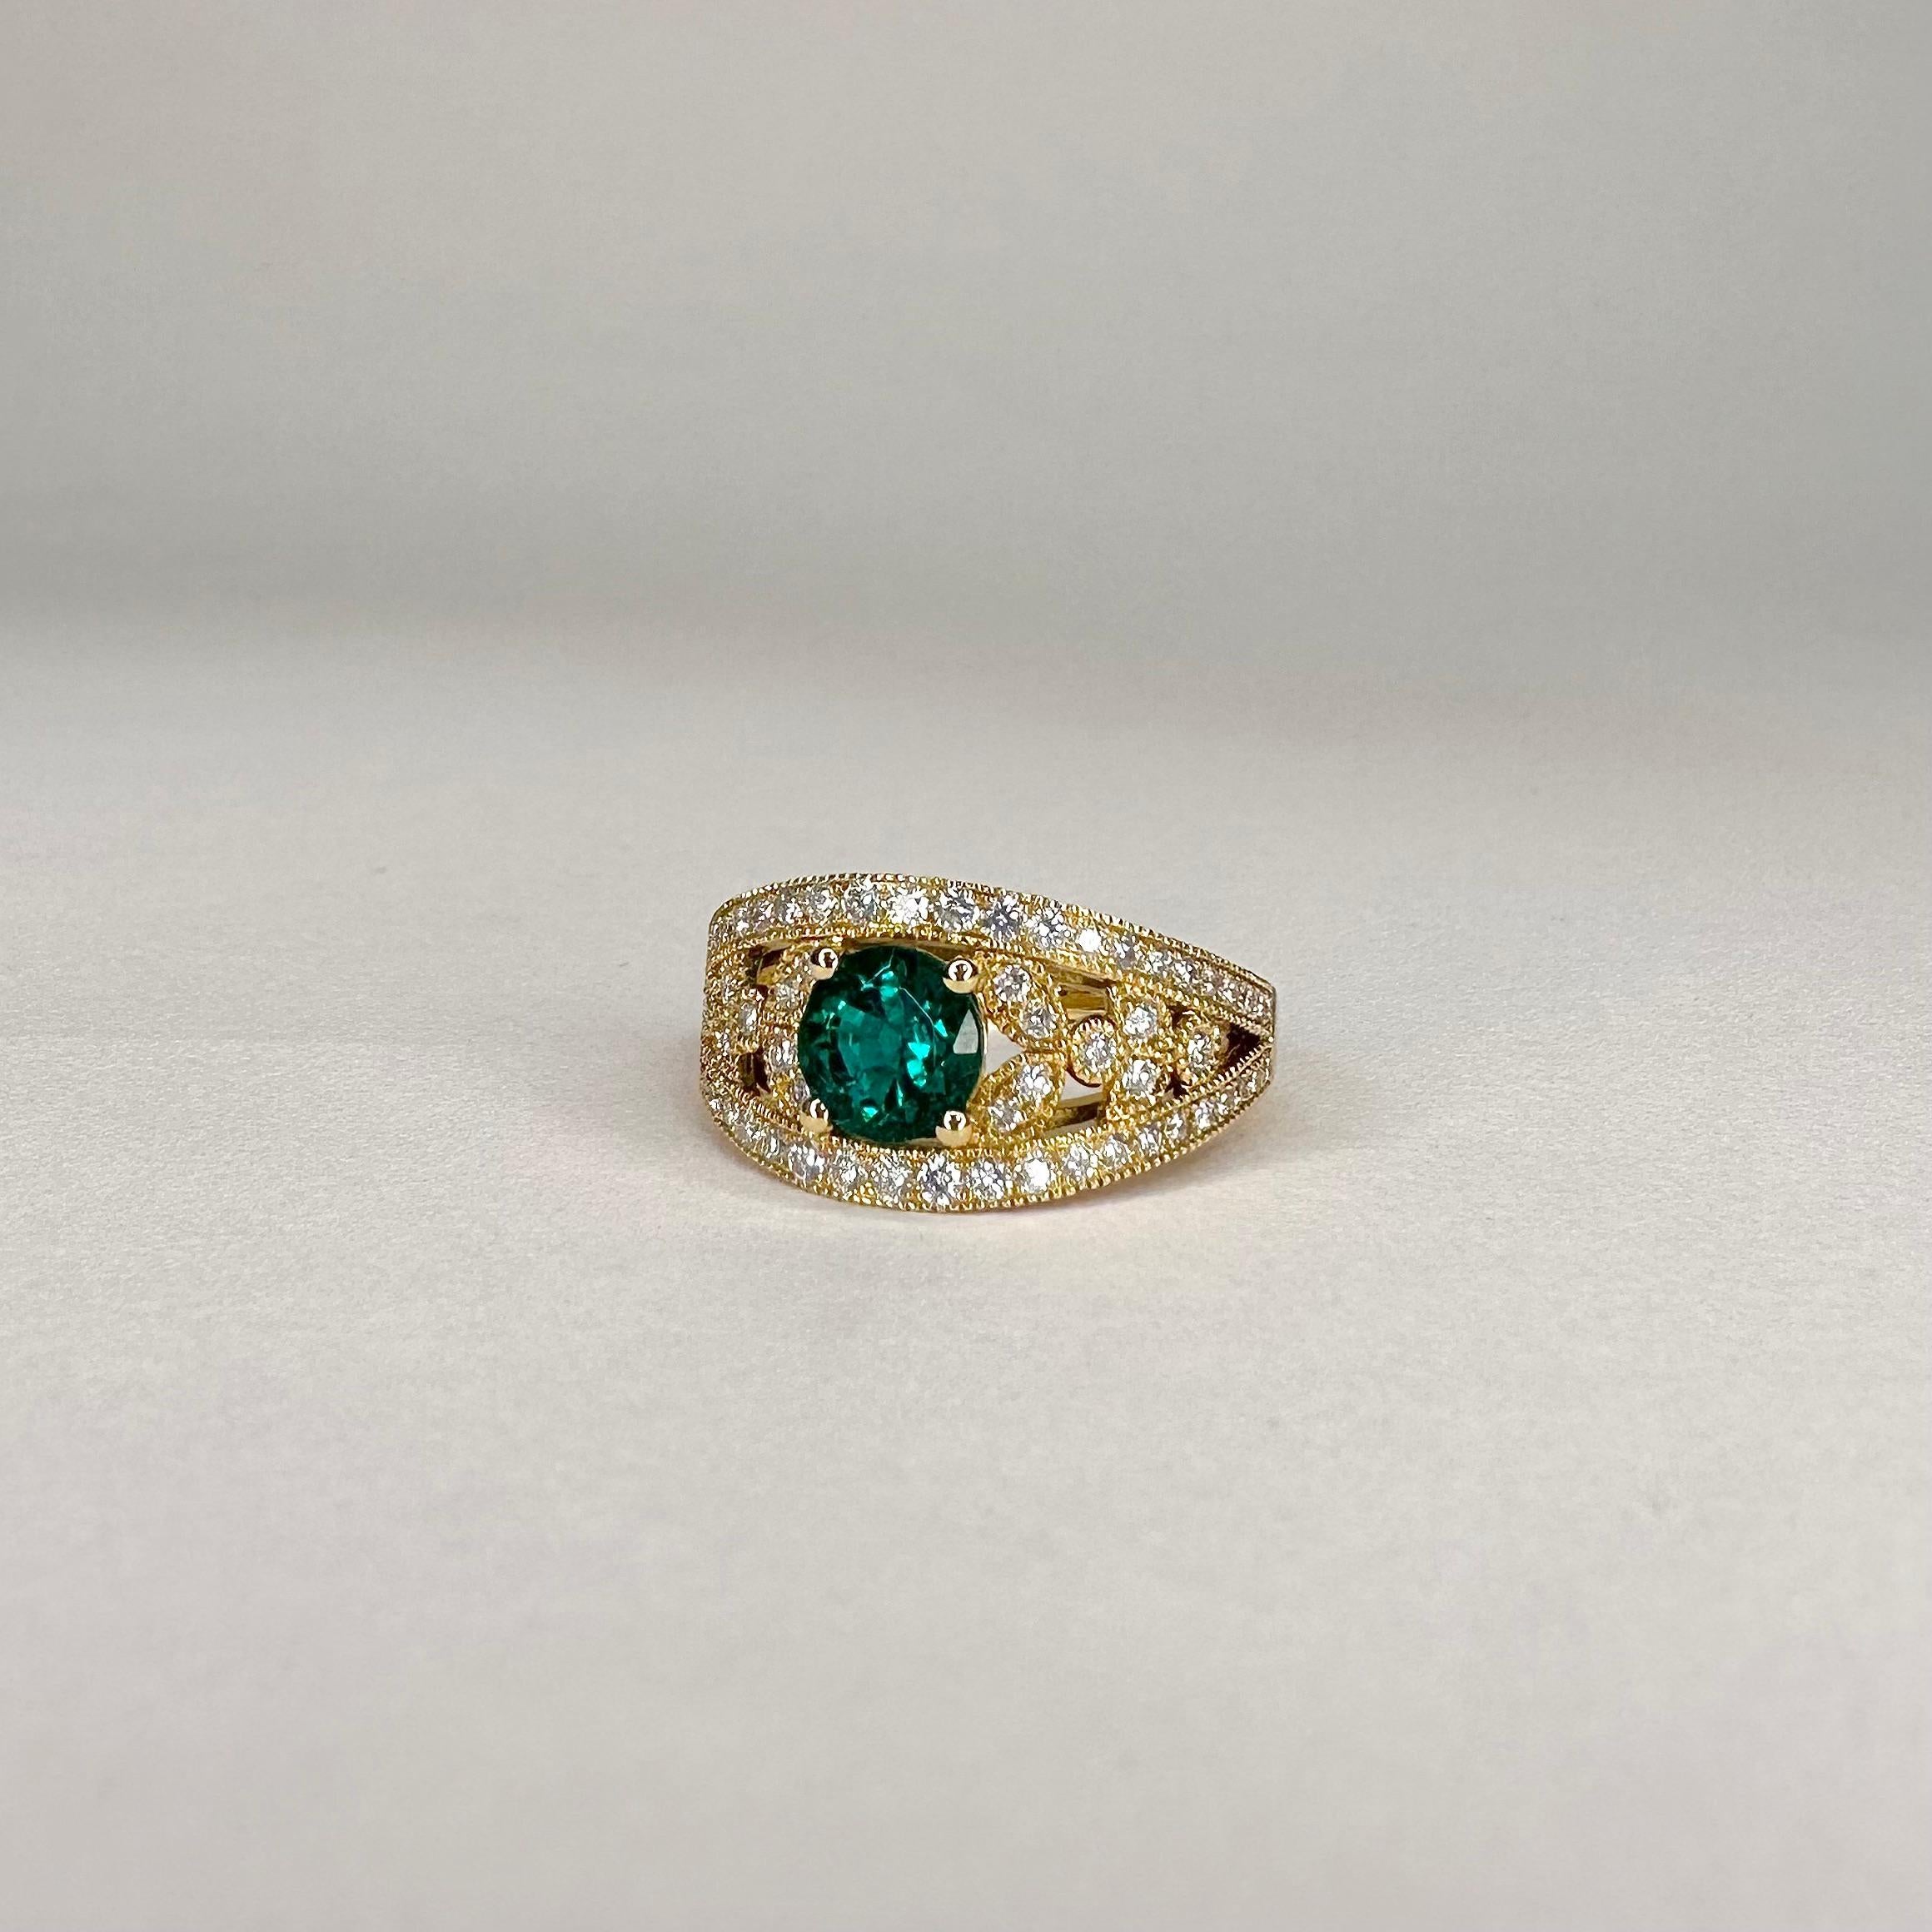 For Sale:  18k Yellow Gold Laurel Leaf Design 0.85 Ct Vivid Green Emerald Ring with Diamond 4